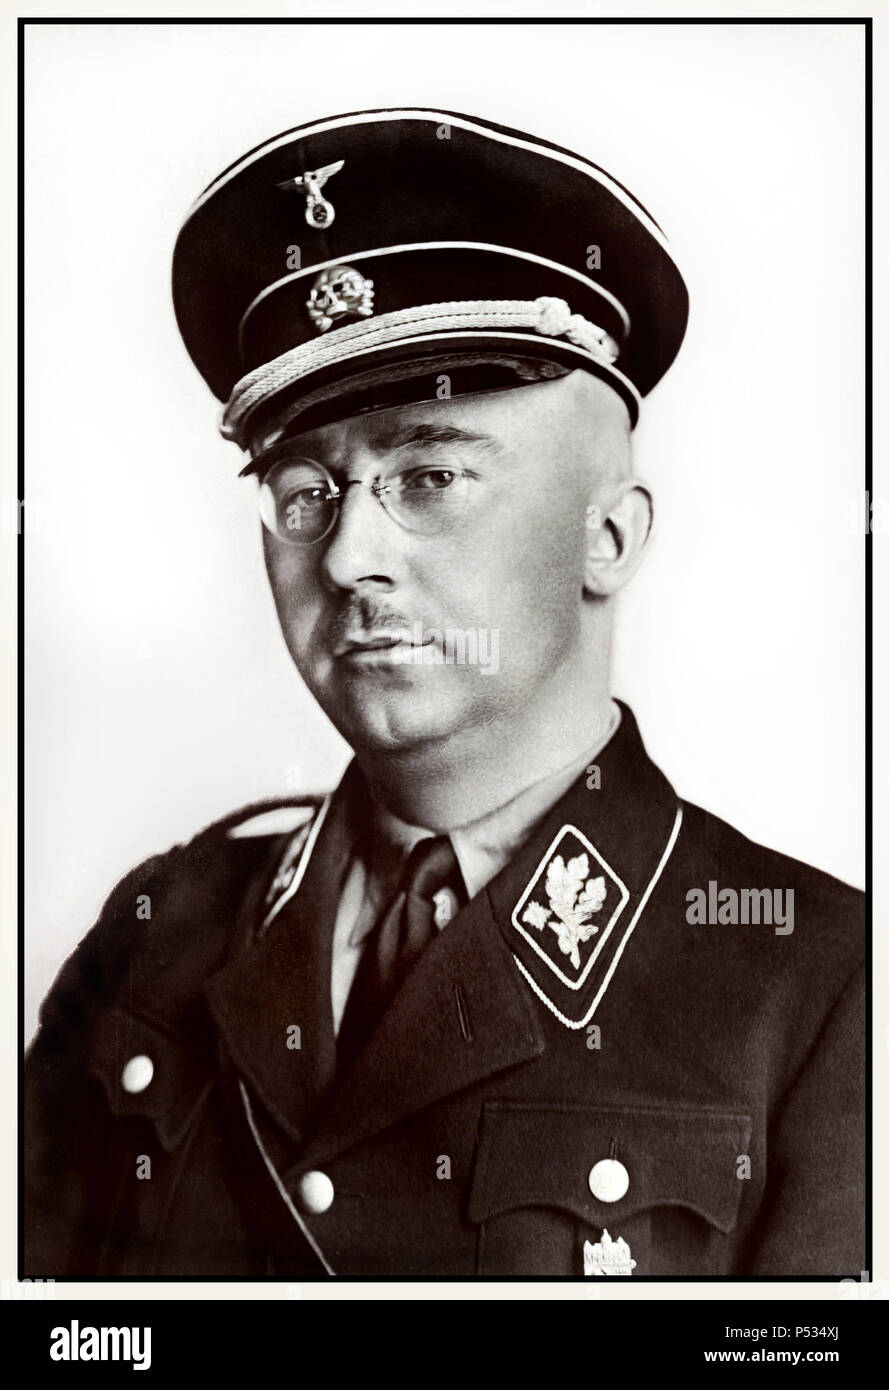 1940's WW2 Heinrich Himmler formal portrait in Waffen SS uniform  German National Socialist Politician Nazi military commander secret police.  Himmler was one of the most powerful men in Nazi Germany and one of the people most directly responsible for the Holocaust. Facilitated genocide across Europe and the east. Committed suicide in 1945 after being captured fleeing under another identity. Stock Photo